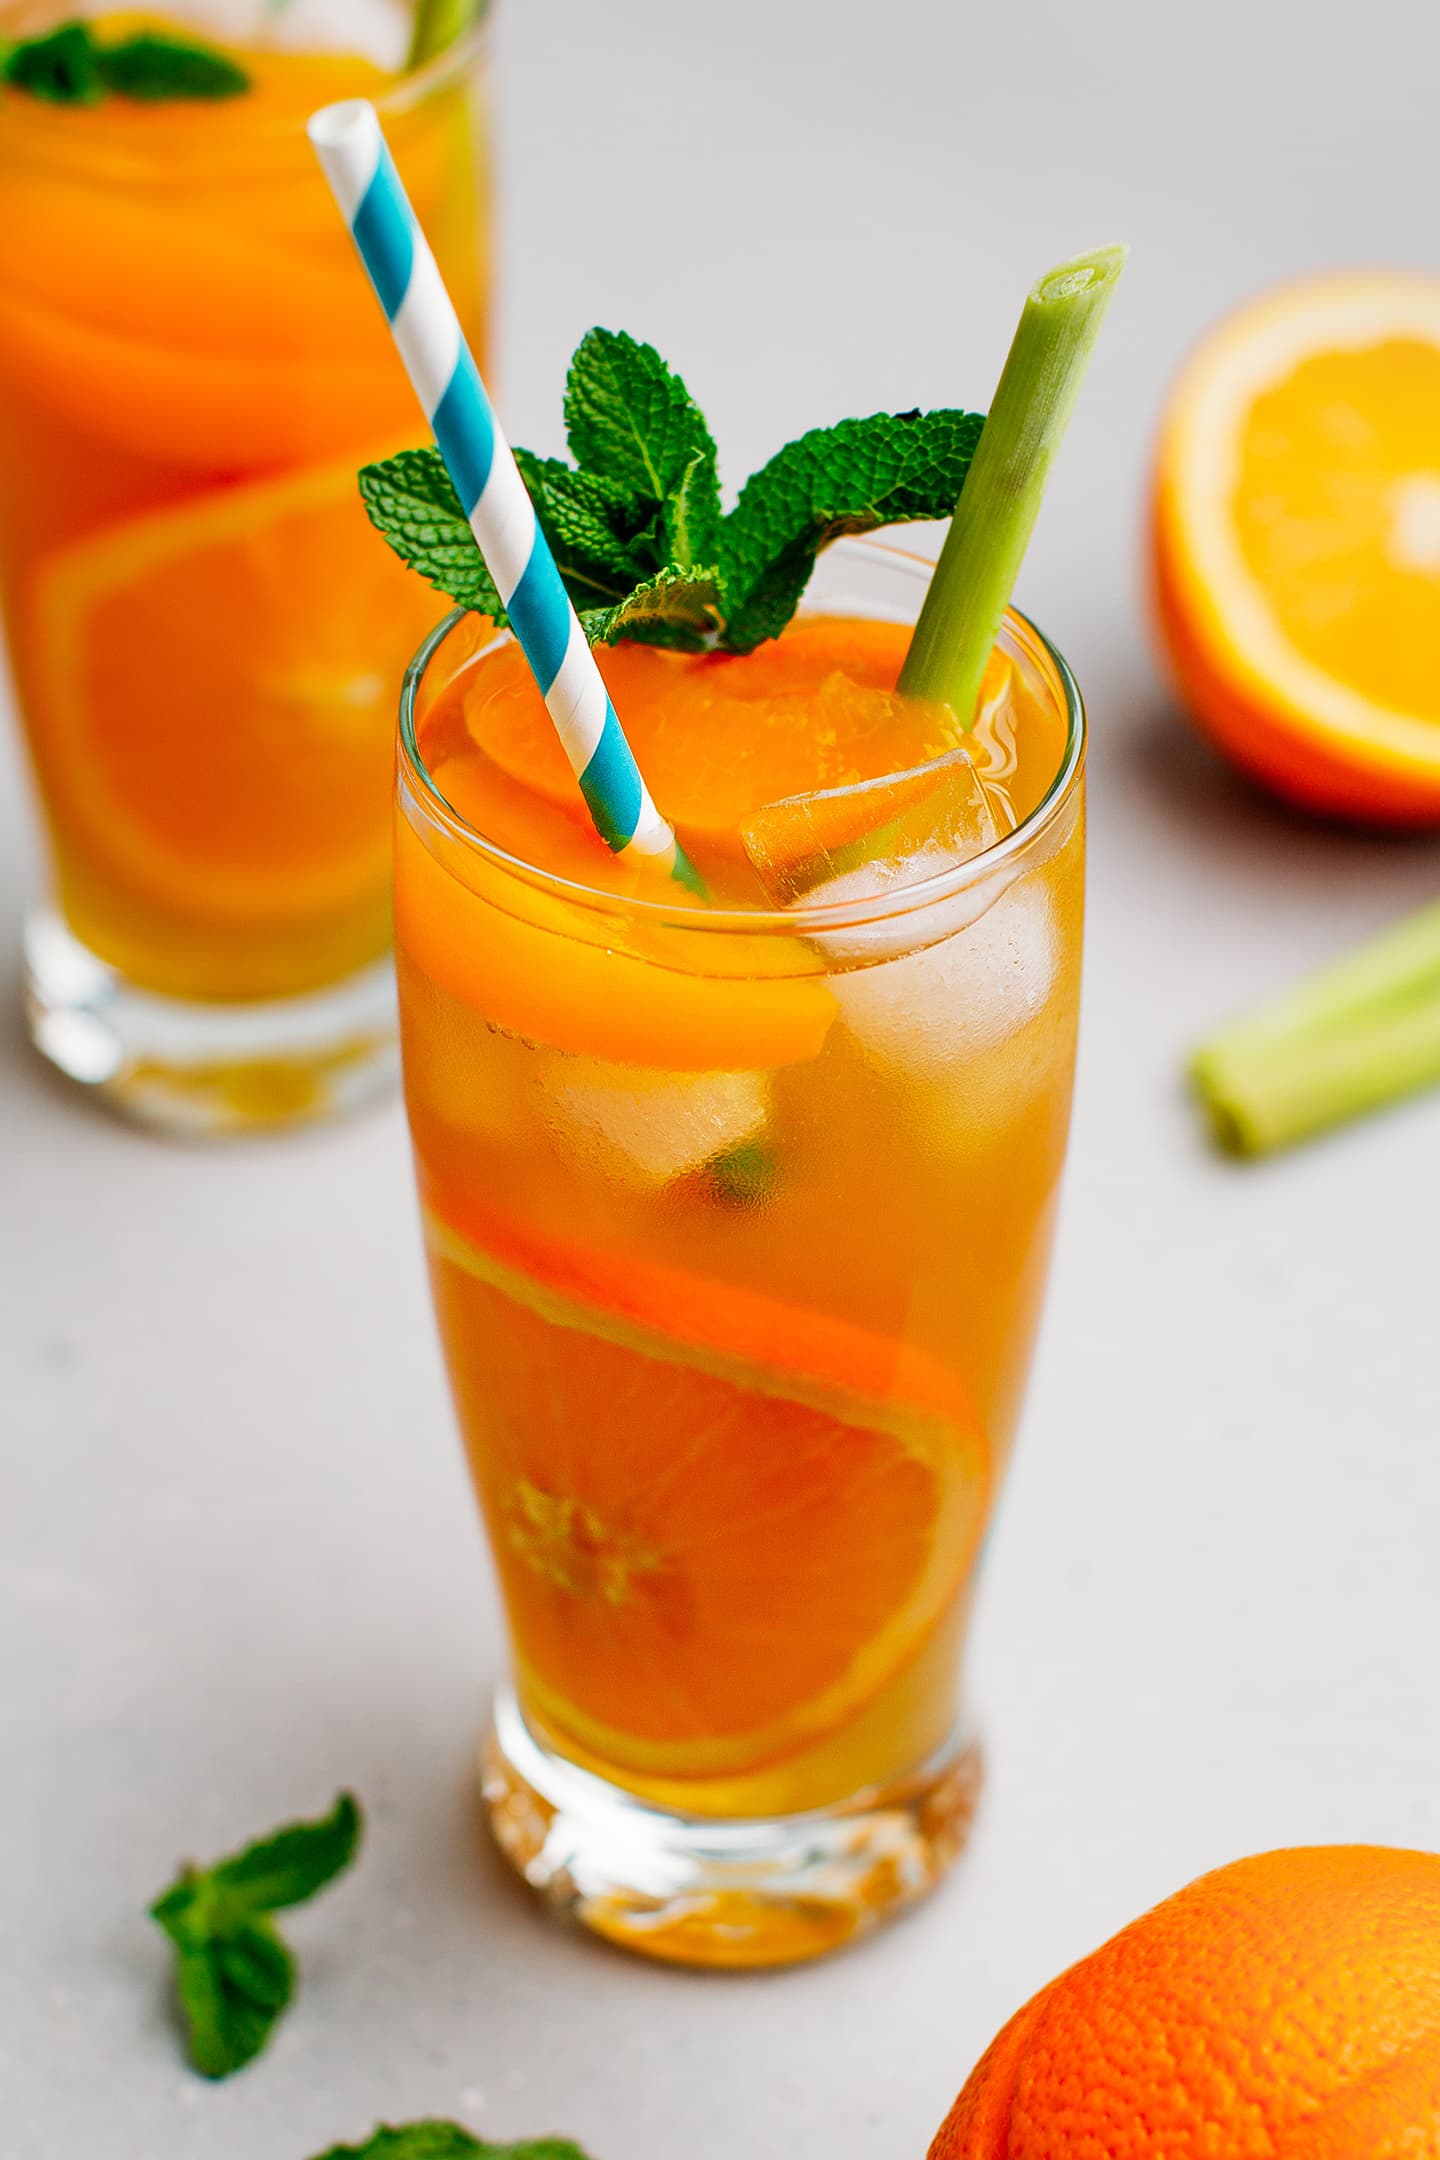 Glass of iced tea with orange slices, lemongrass, and mint leaves.